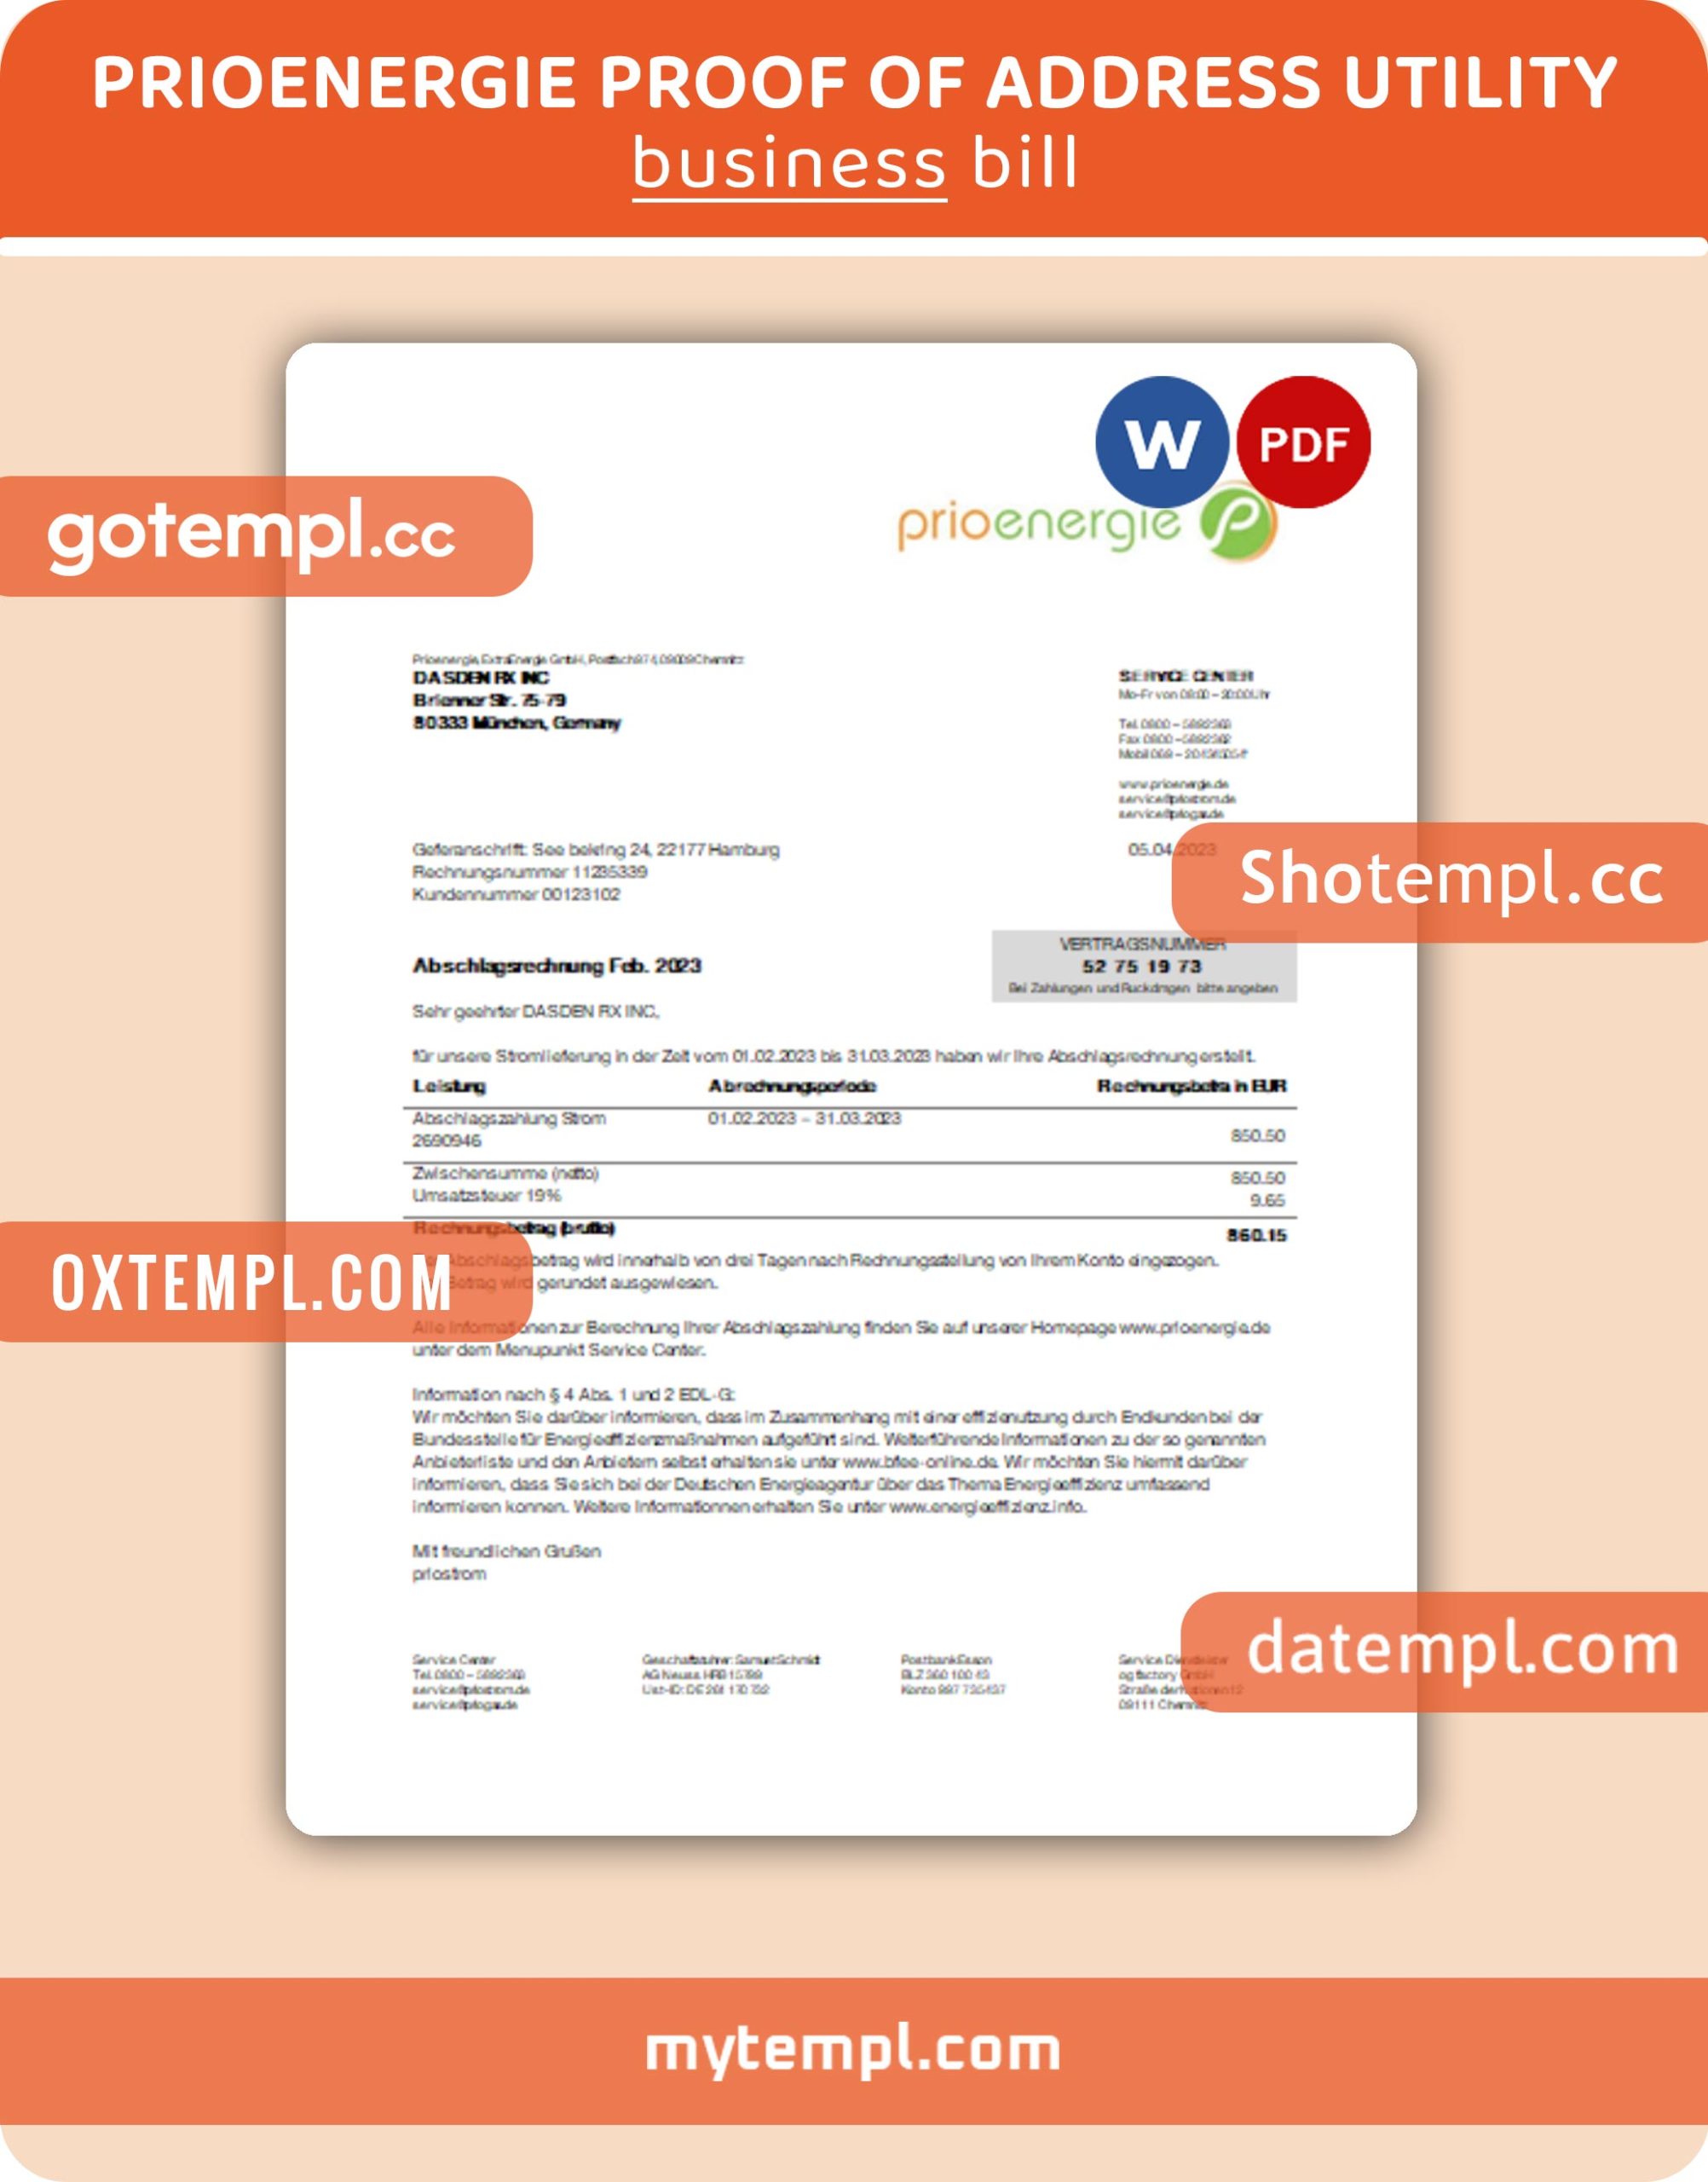 USA Ohio Vectren Energy utility bill template in Word and PDF format